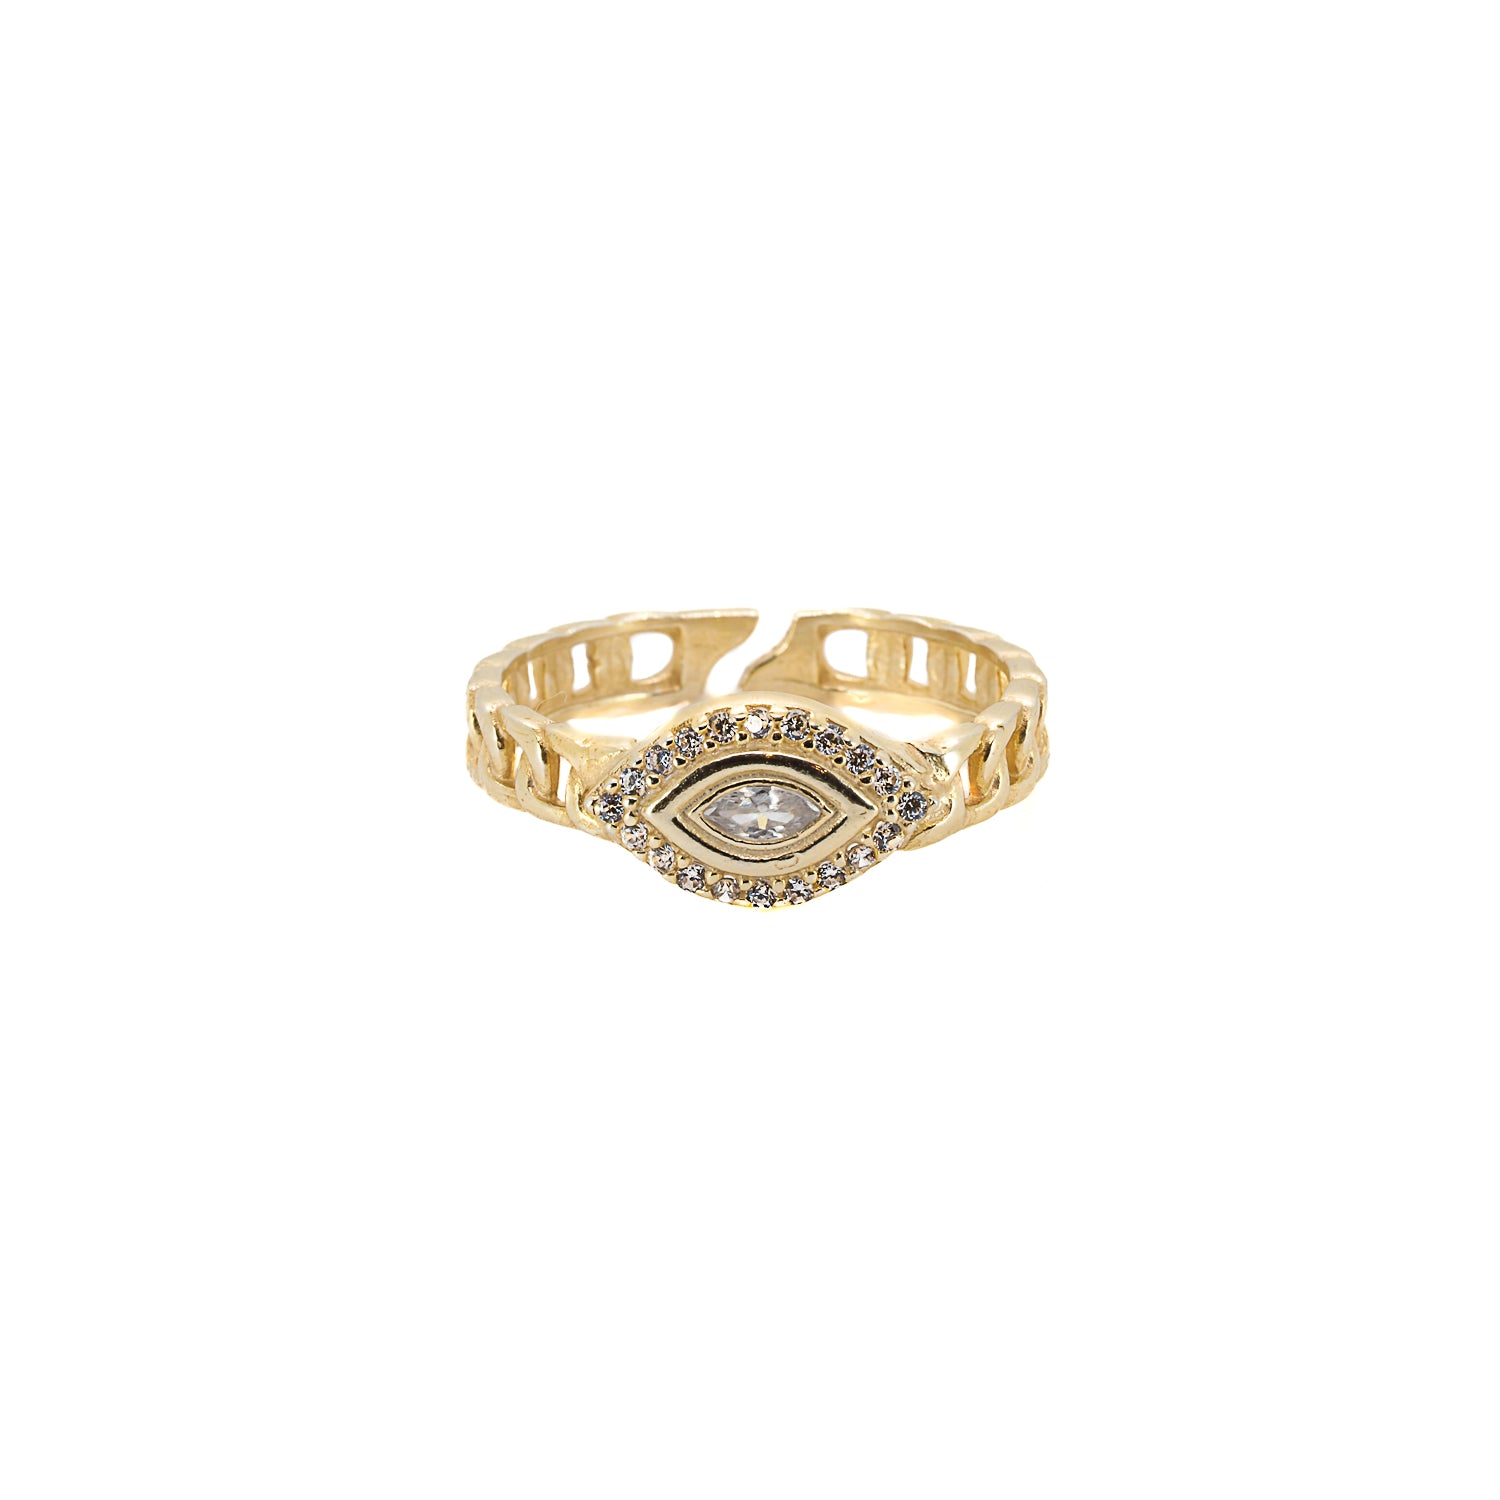 Evil Eye Symbol Ring - Luxurious Shine &amp; Cultural Significance